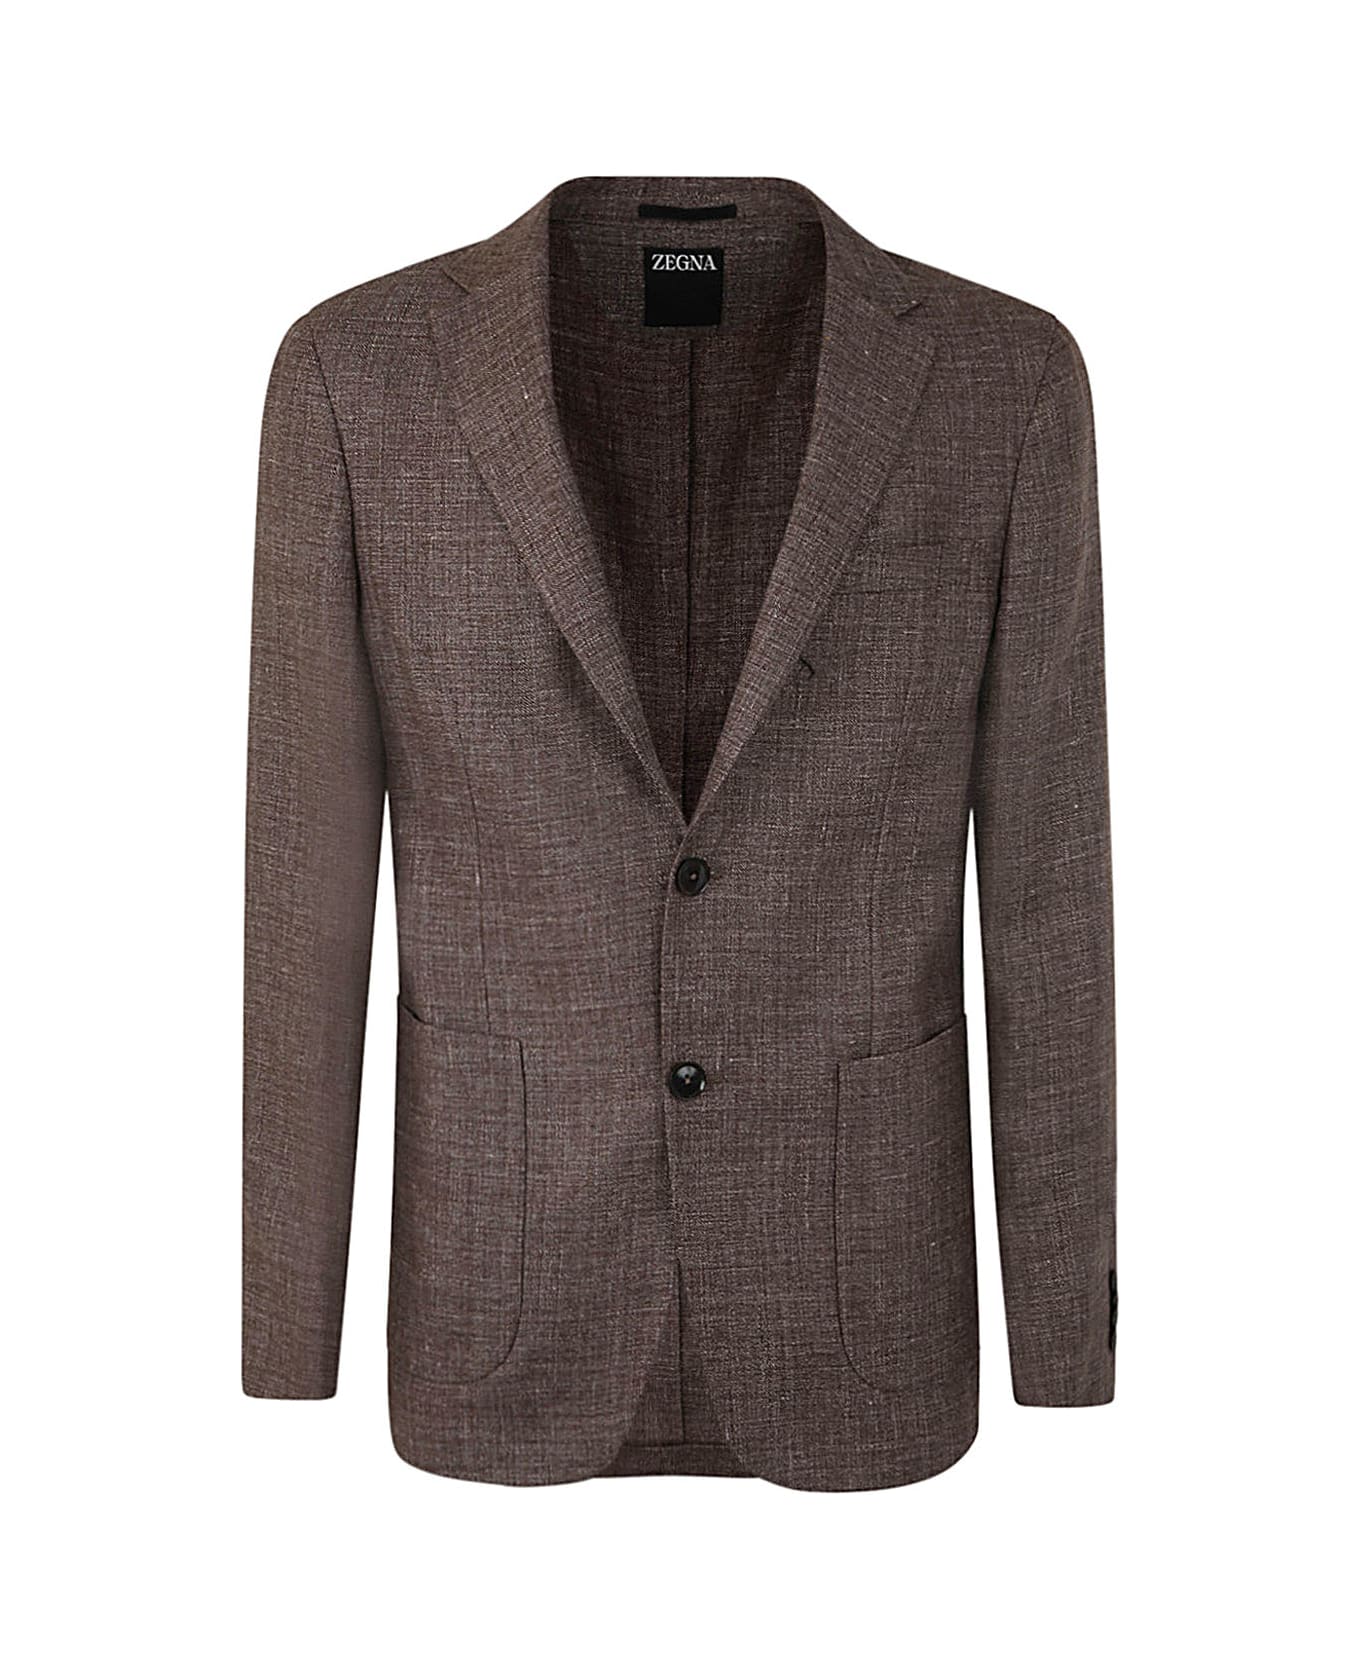 Zegna Linen And Wool Jacket - Brown